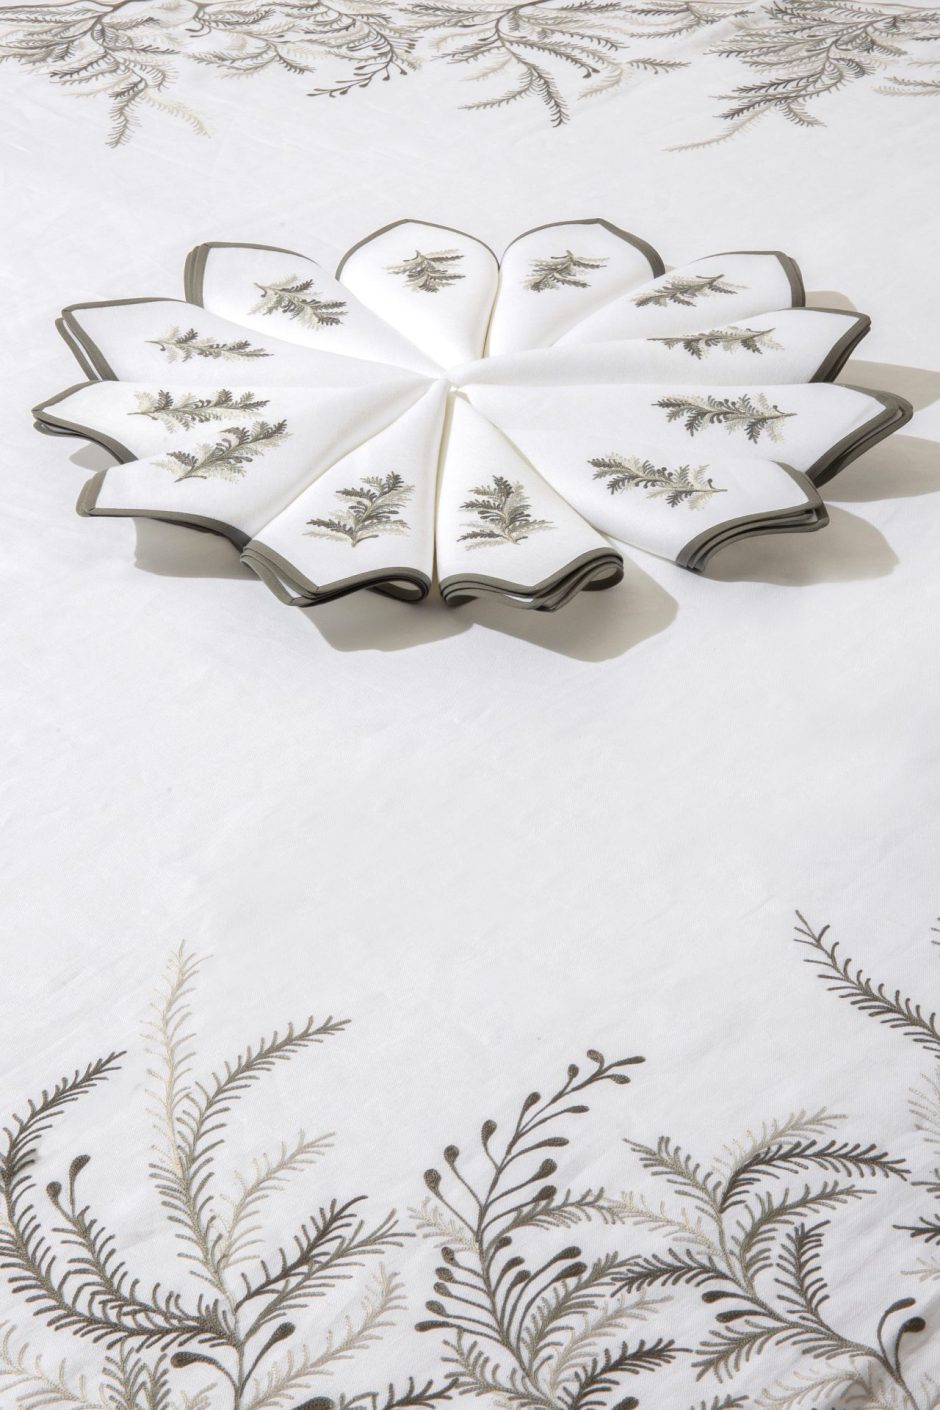 CAPONIHOME_TABLECLOTH_3_6-scaled